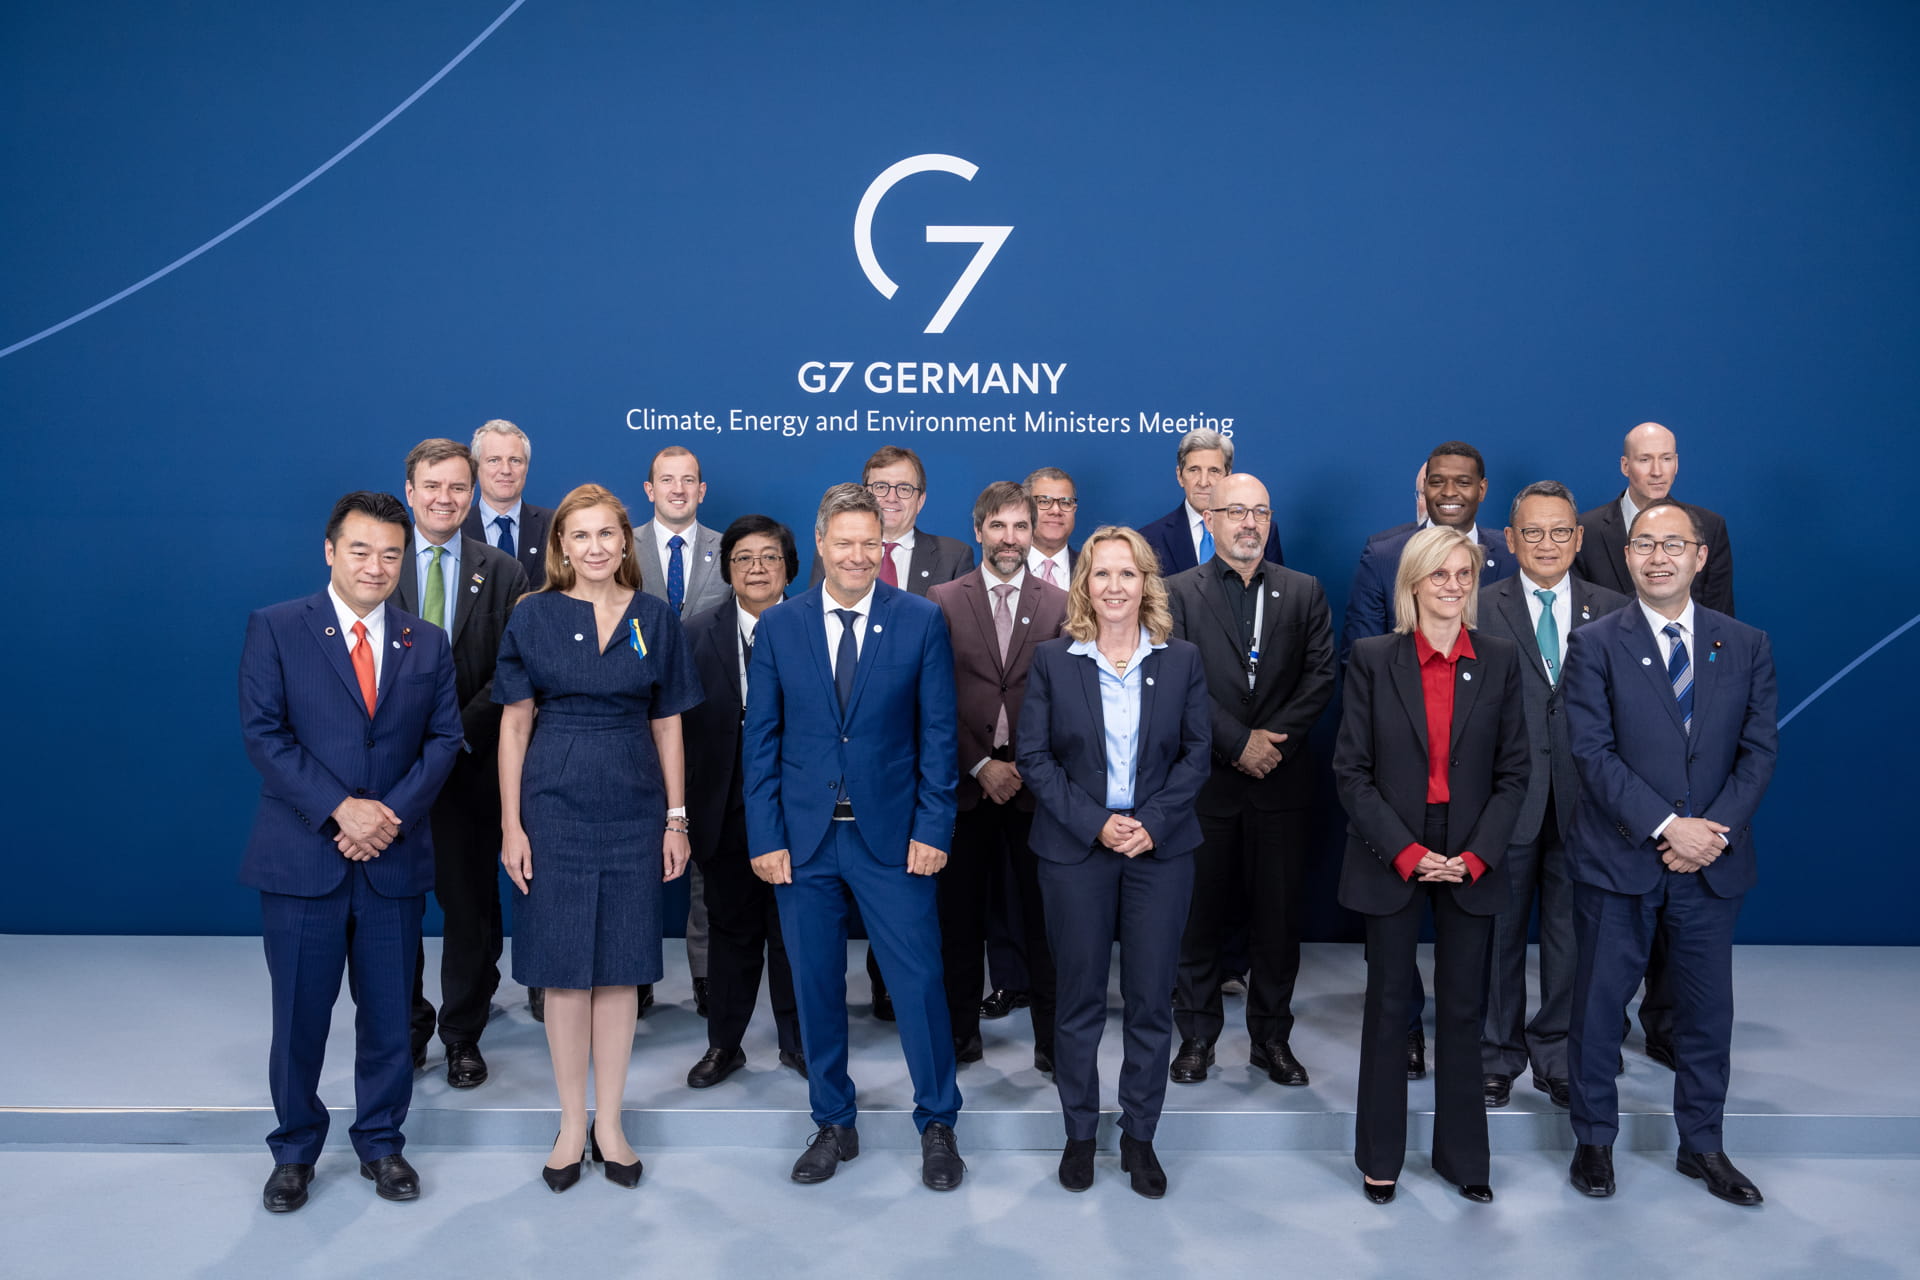 A photo of the G7 ministers at the meeting in Berlin in May 2022